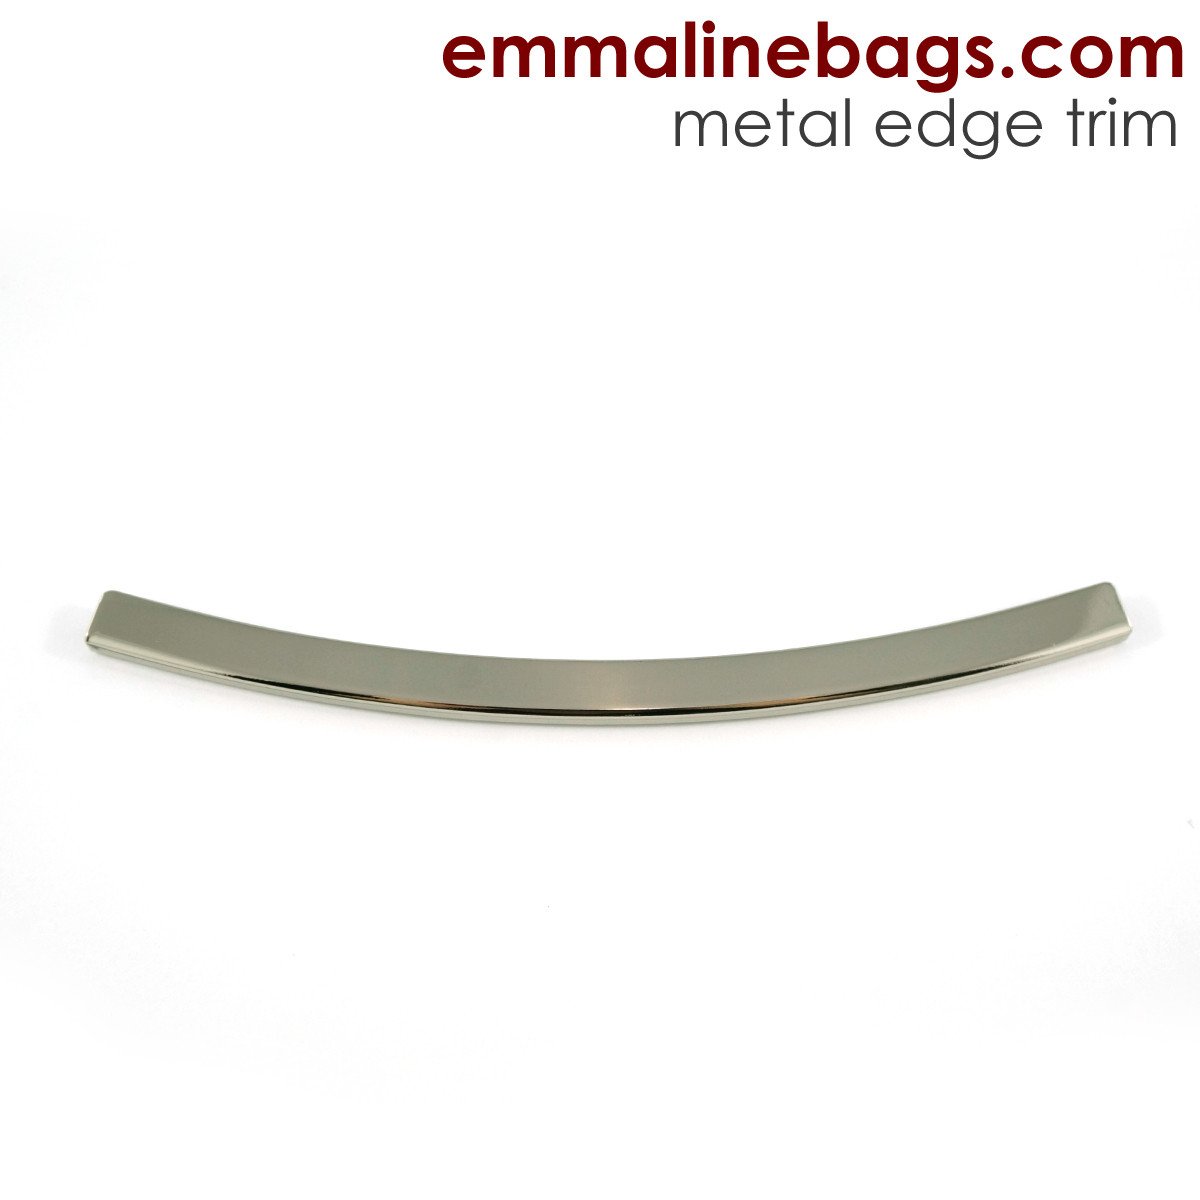 NEW! Metal Edge Trim: Style D - Curved (1 per package)